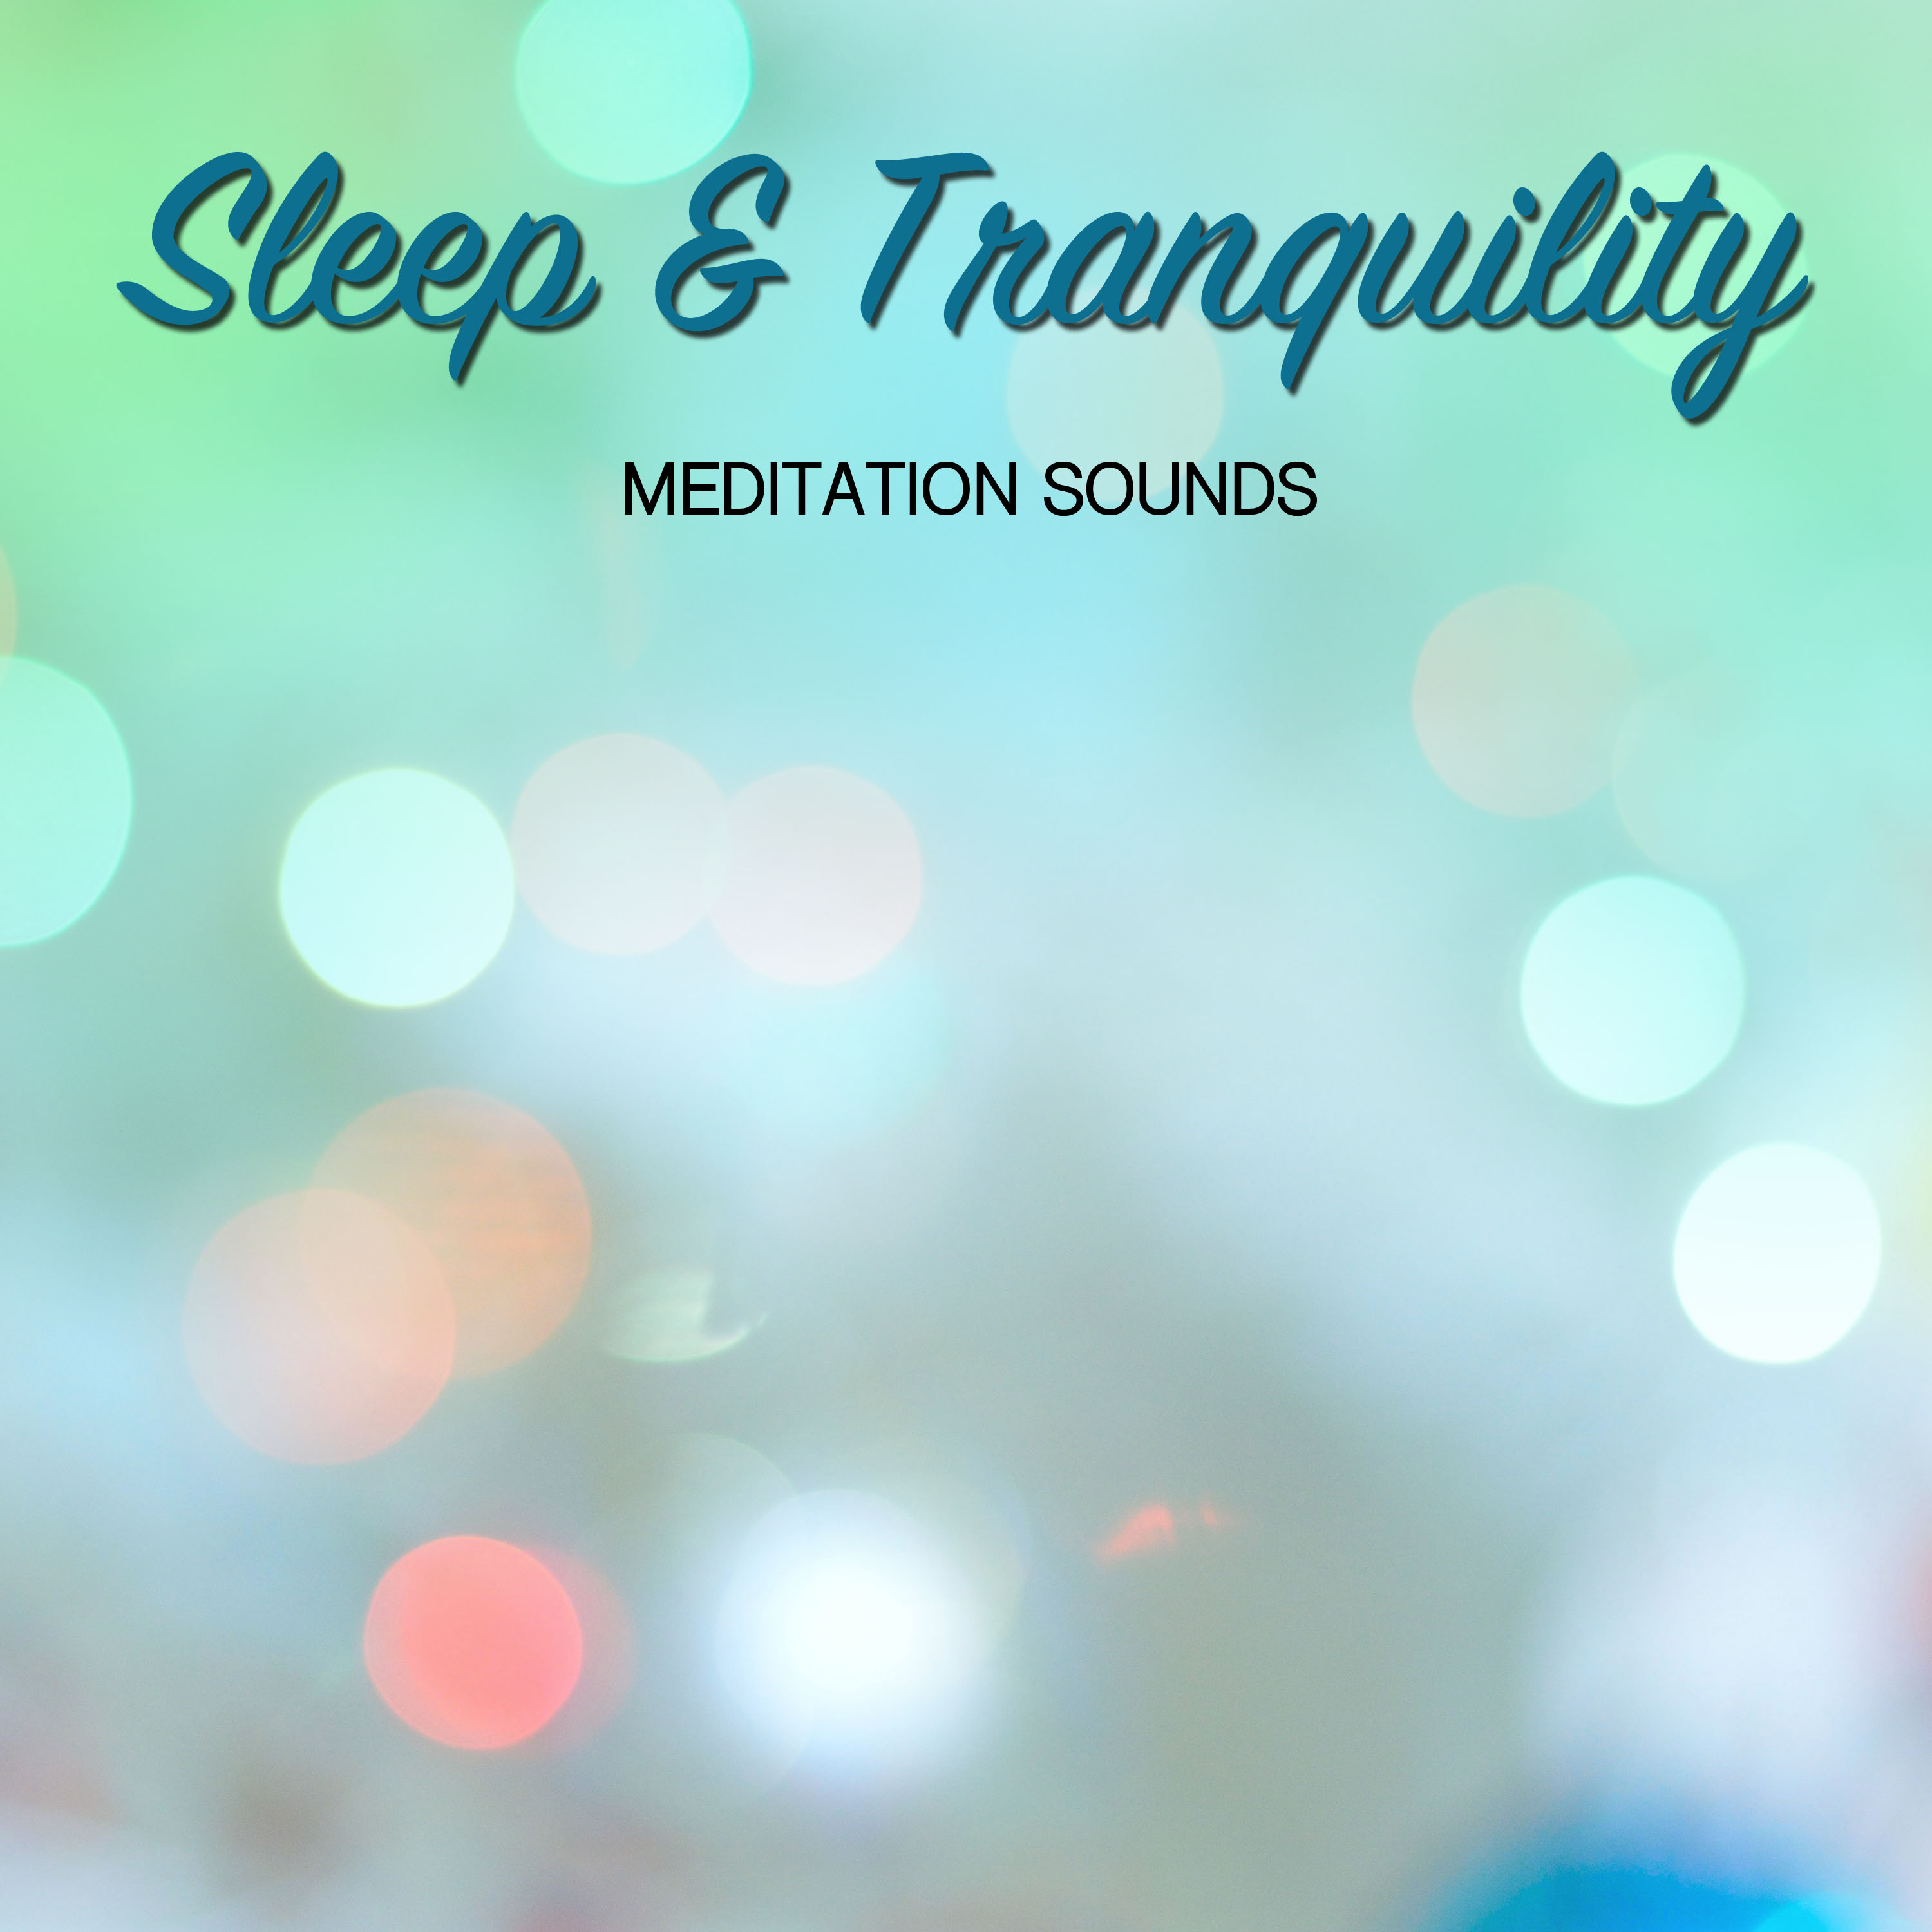 11 Meditation Sounds for Sleep and Tranquility